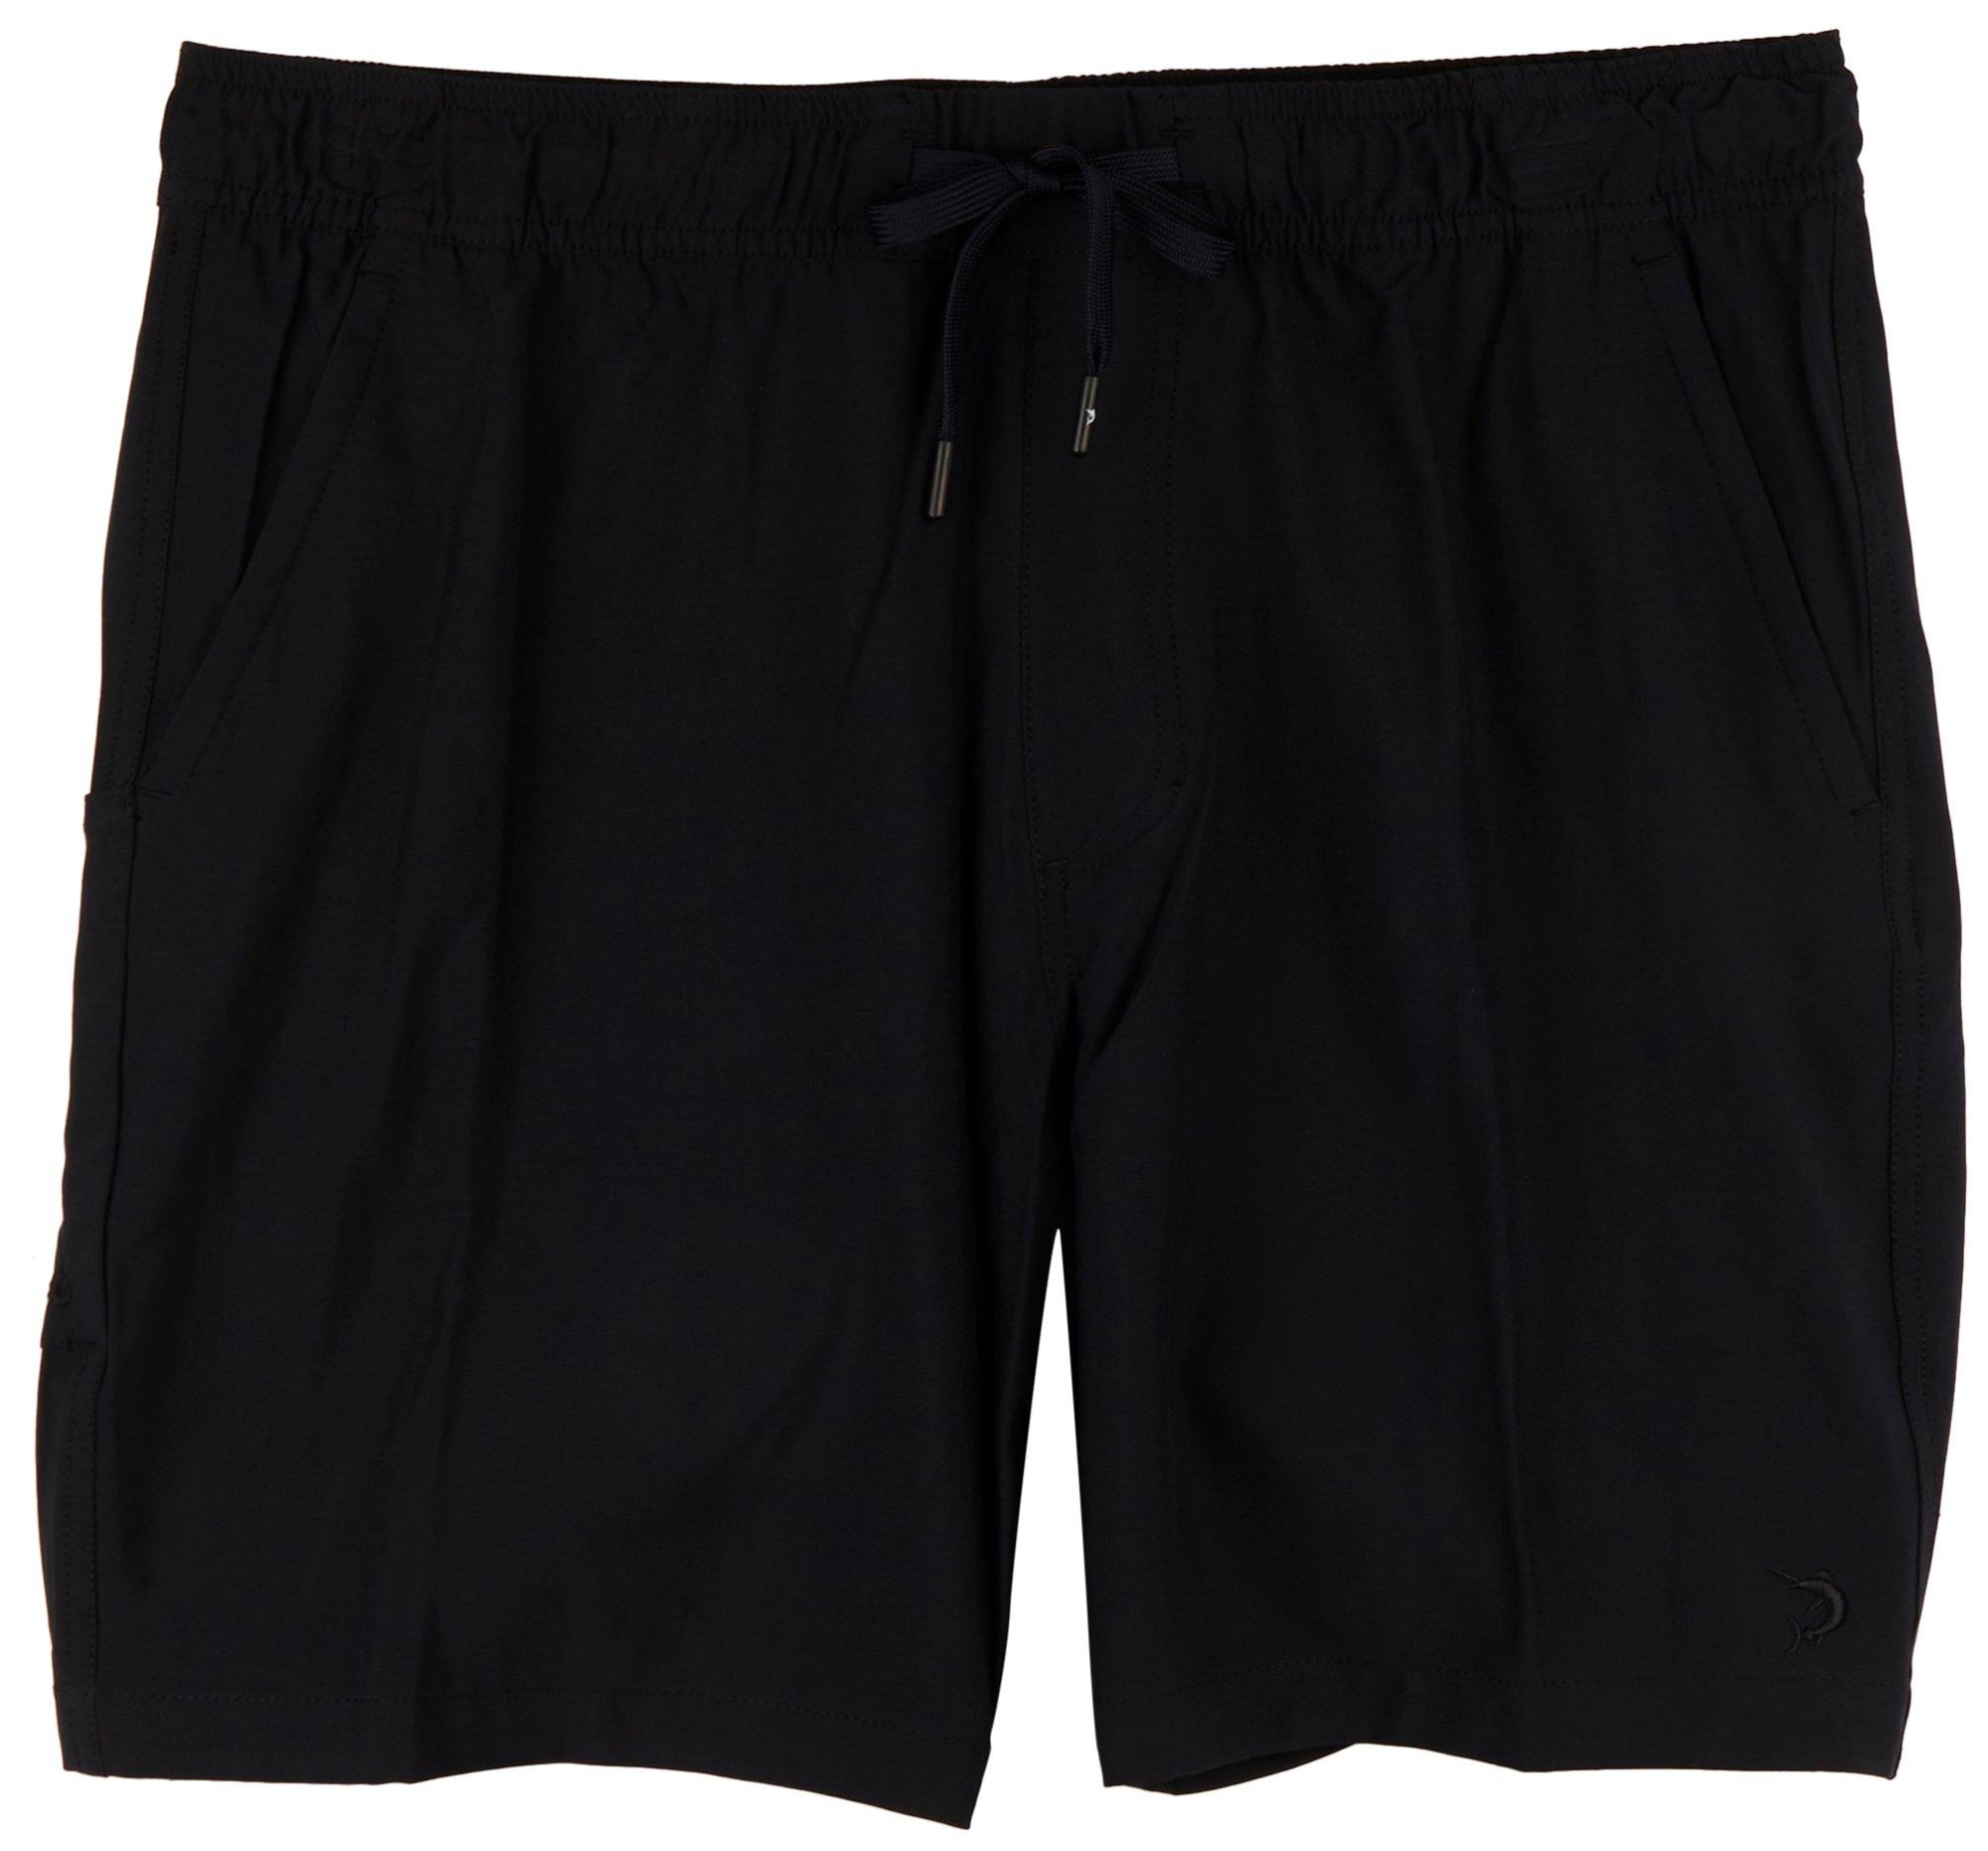 Reel Legends Mens 7 in. Pull On Performance Shorts